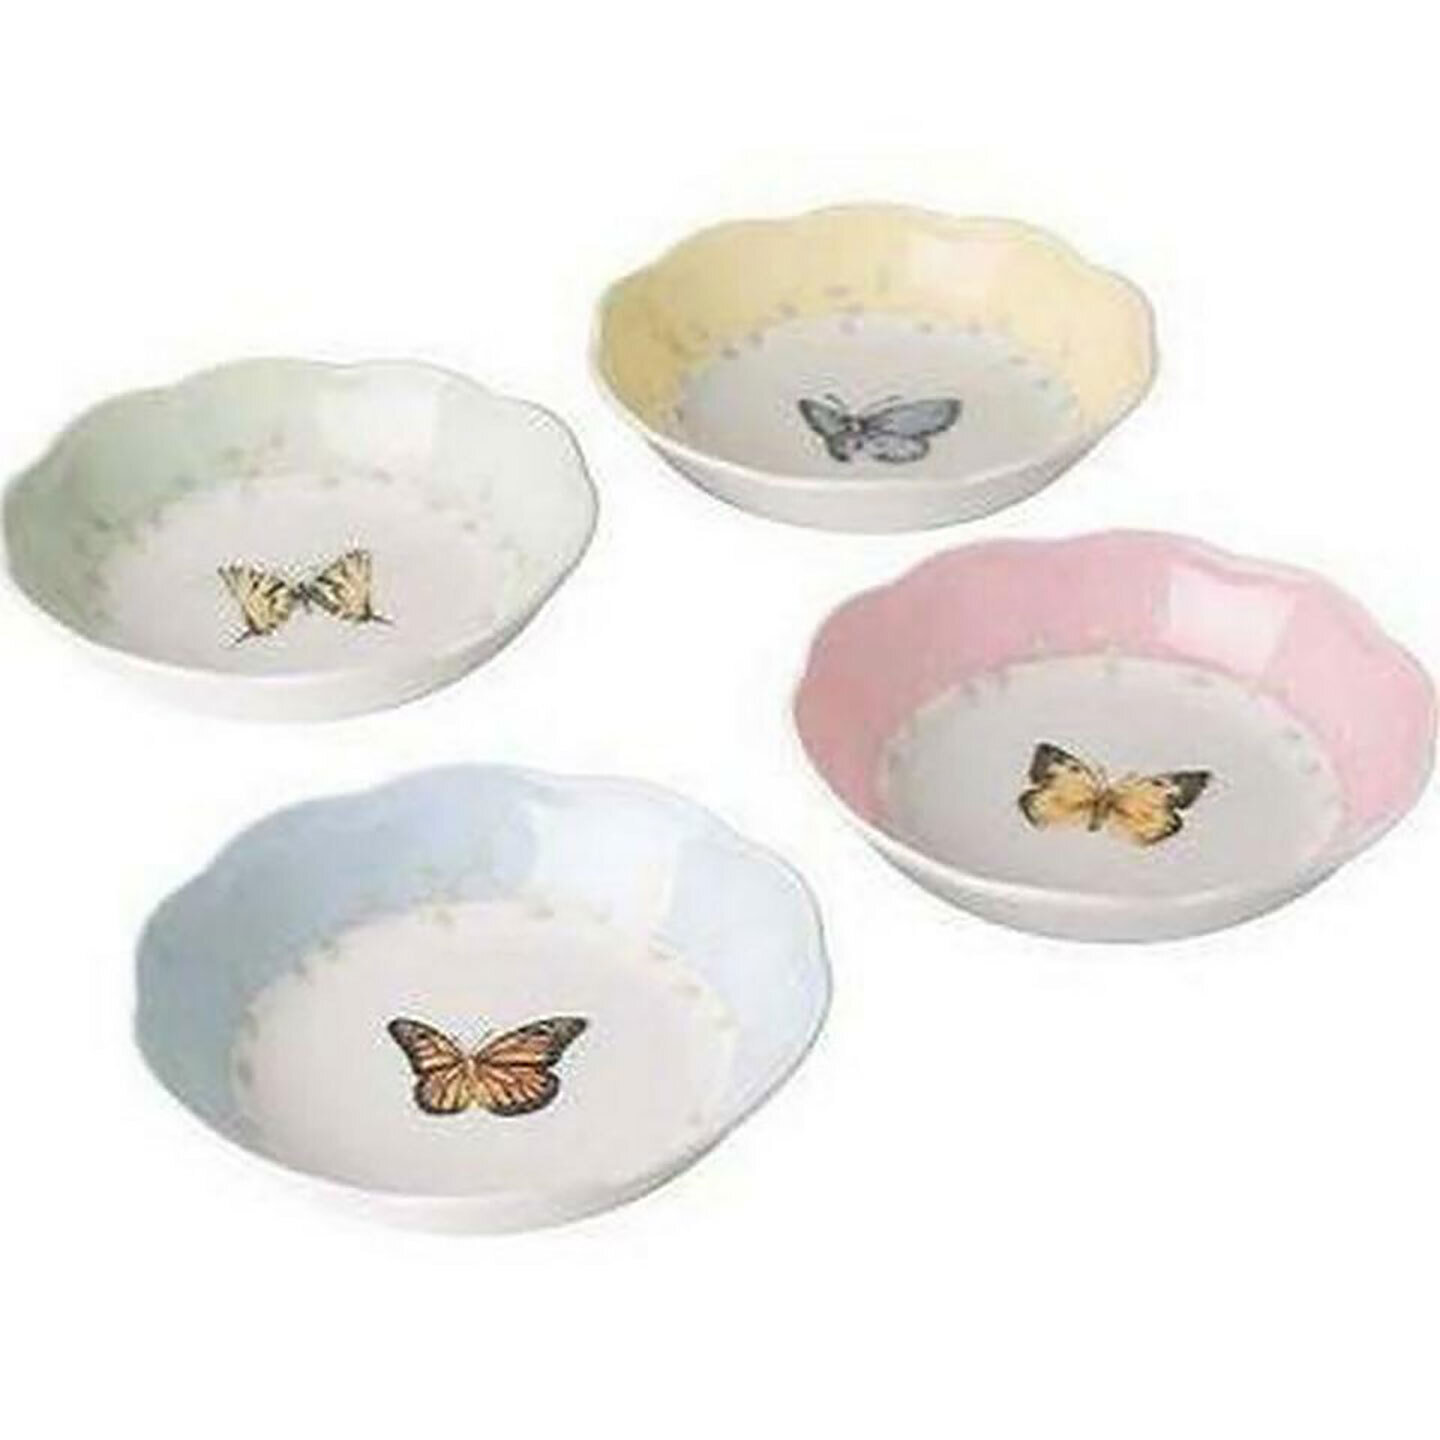 Lenox Butterfly Meadow Colors Fruit Dishes Set of 4 Assorted 806739